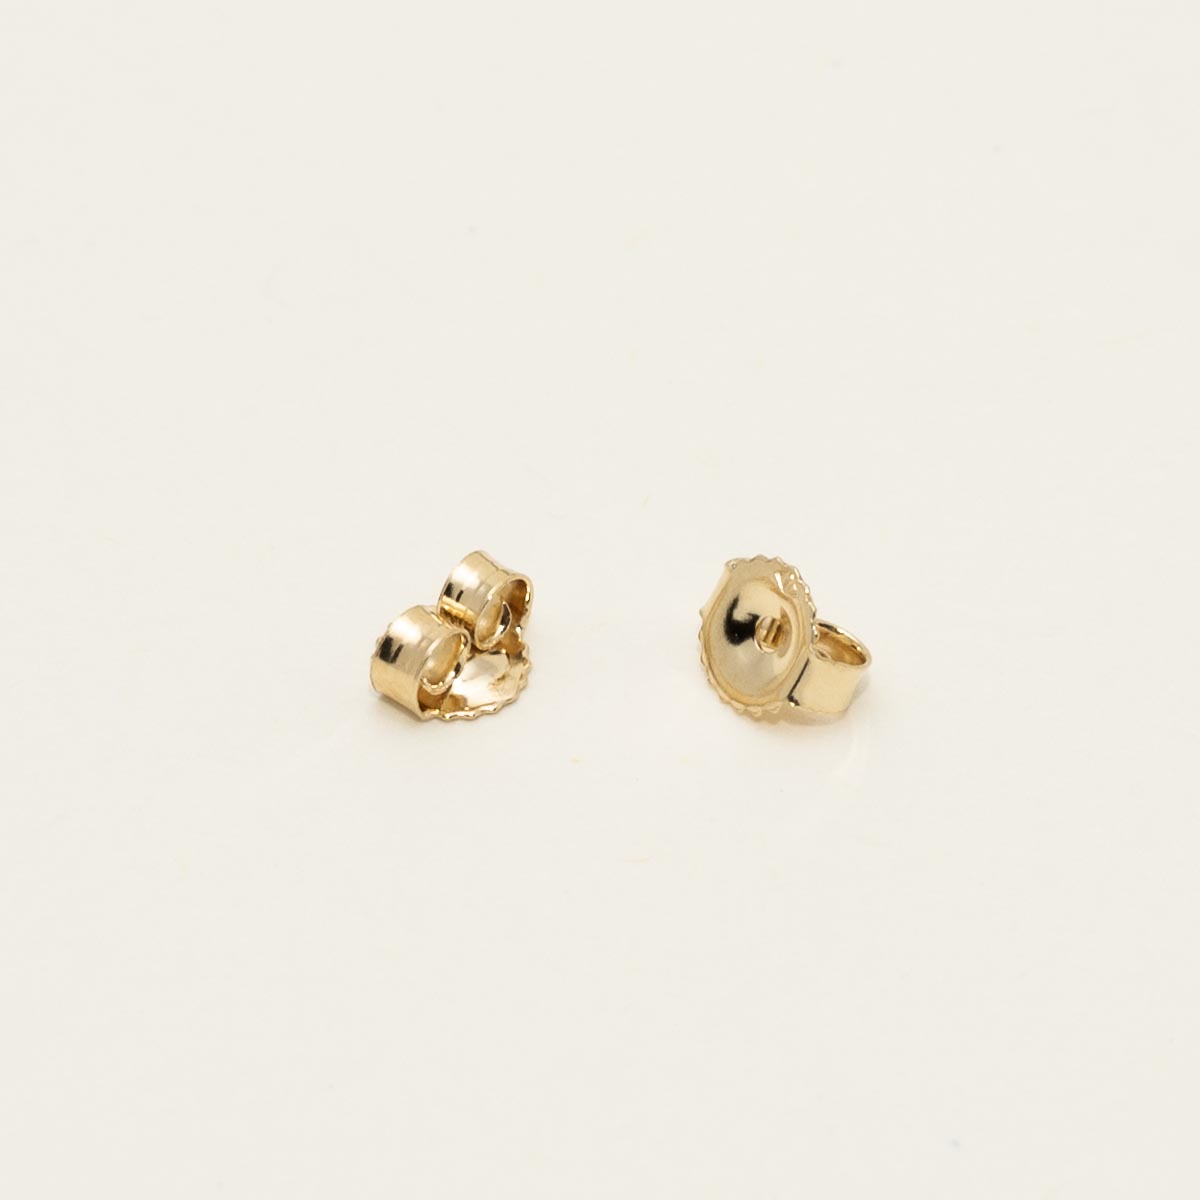 Mastoloni Cultured Freshwater Pearl Stud Earrings in 14kt Yellow Gold (7.5-8mm pearls)